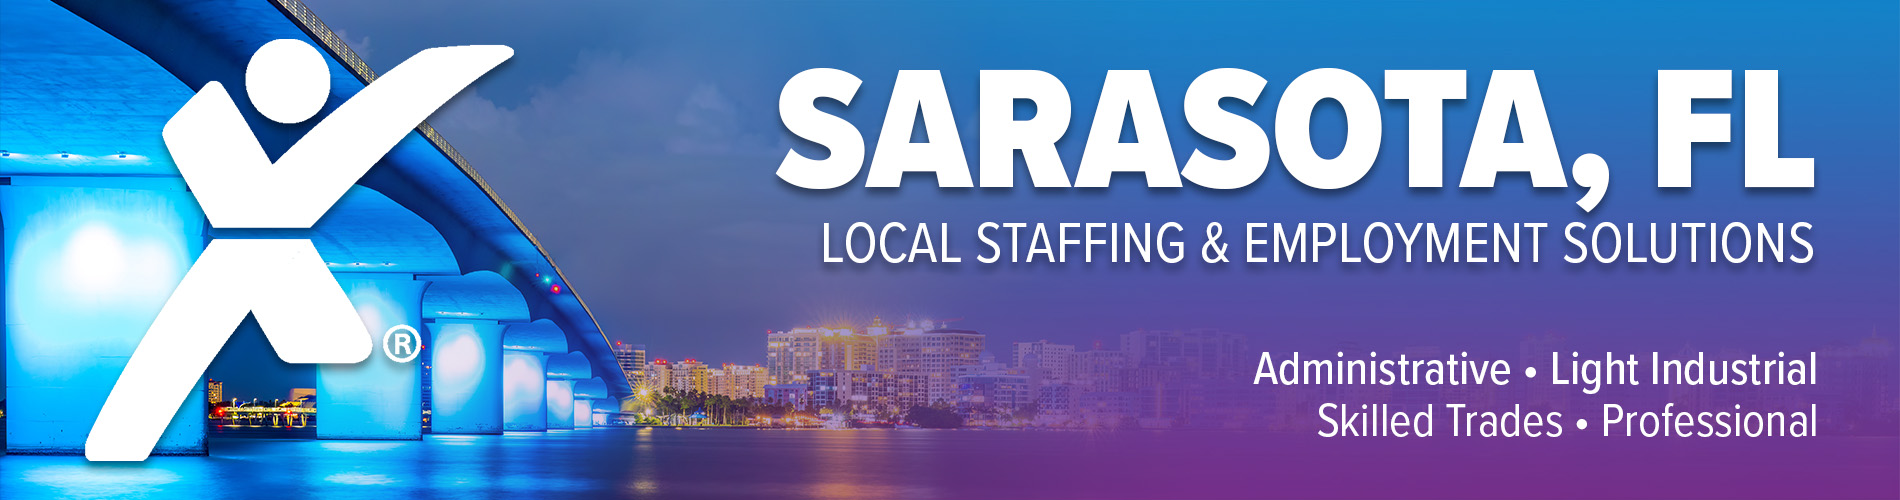 Local Staffing & Employment Solutions in Sarasota, FL - Express